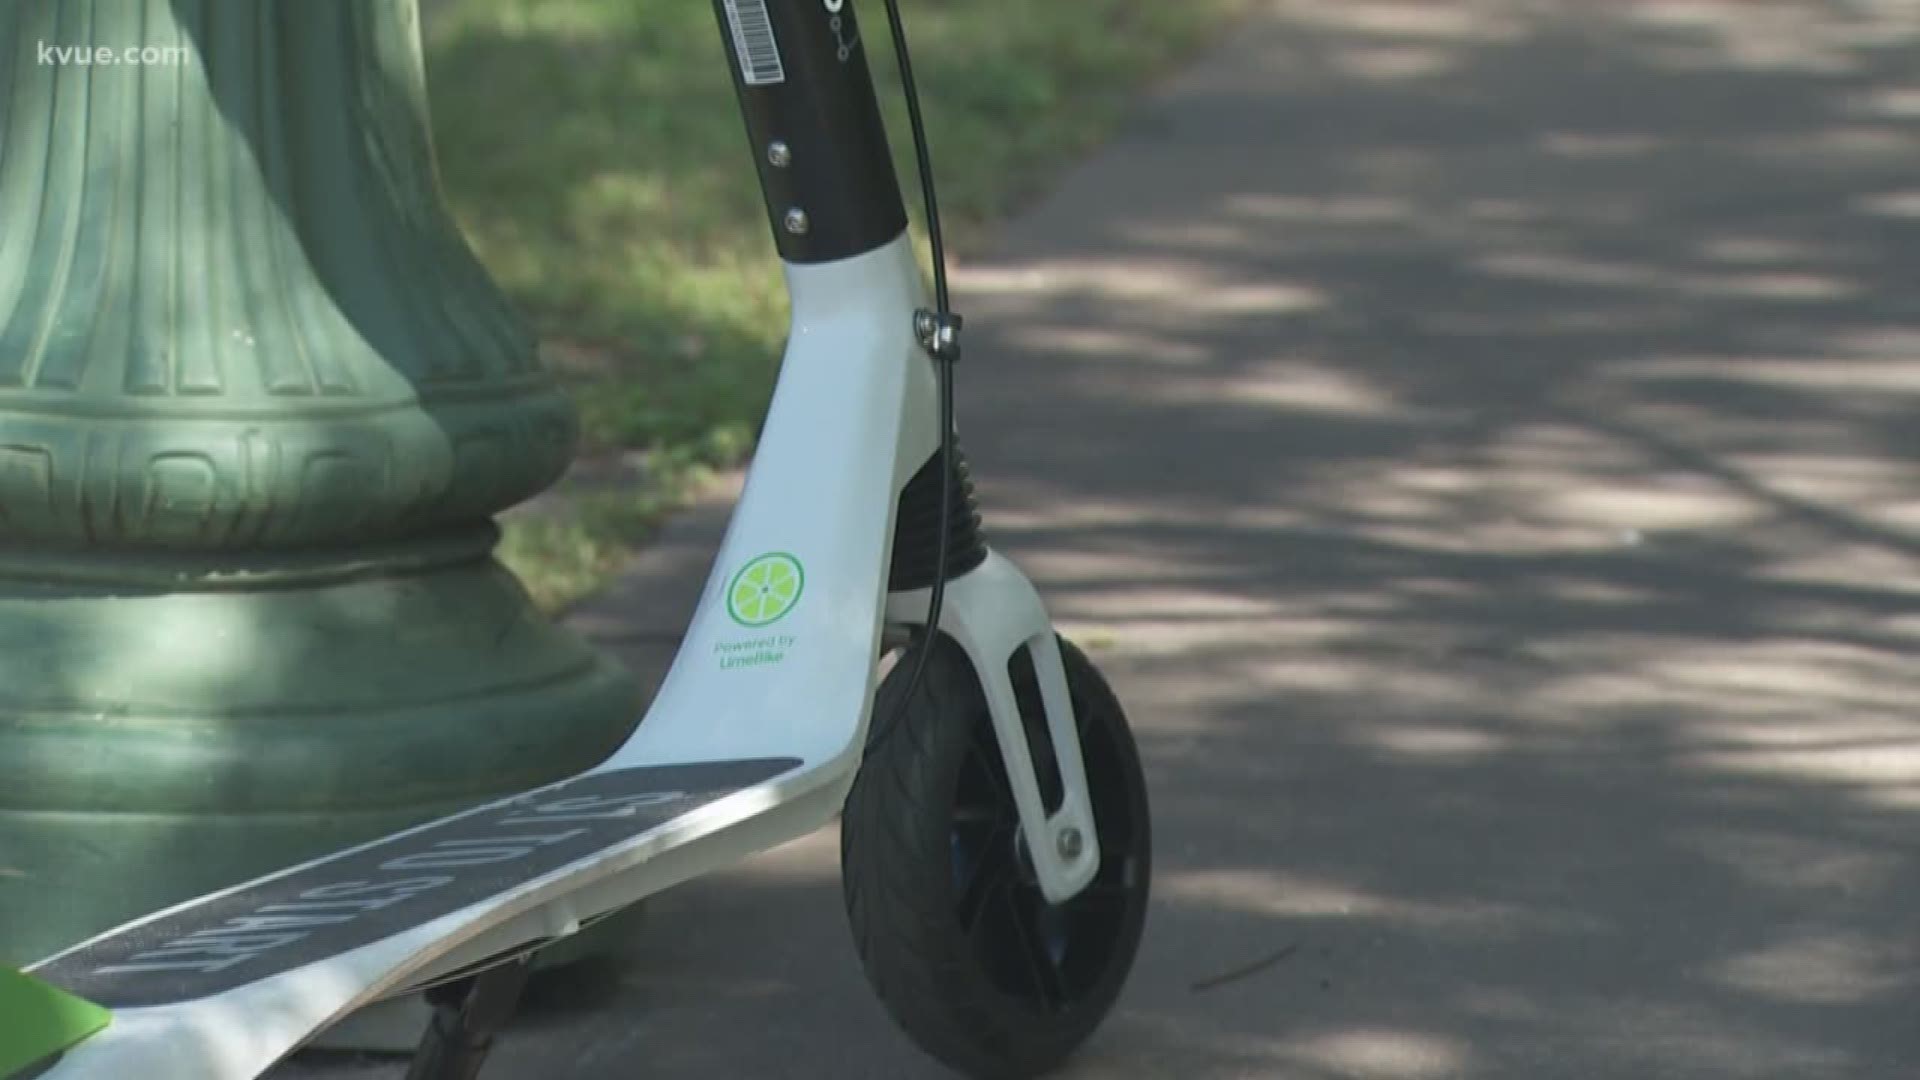 Those dockless scooters you've probably seen around Austin are gone. The companies behind them are keeping them off the streets ... at least for now.